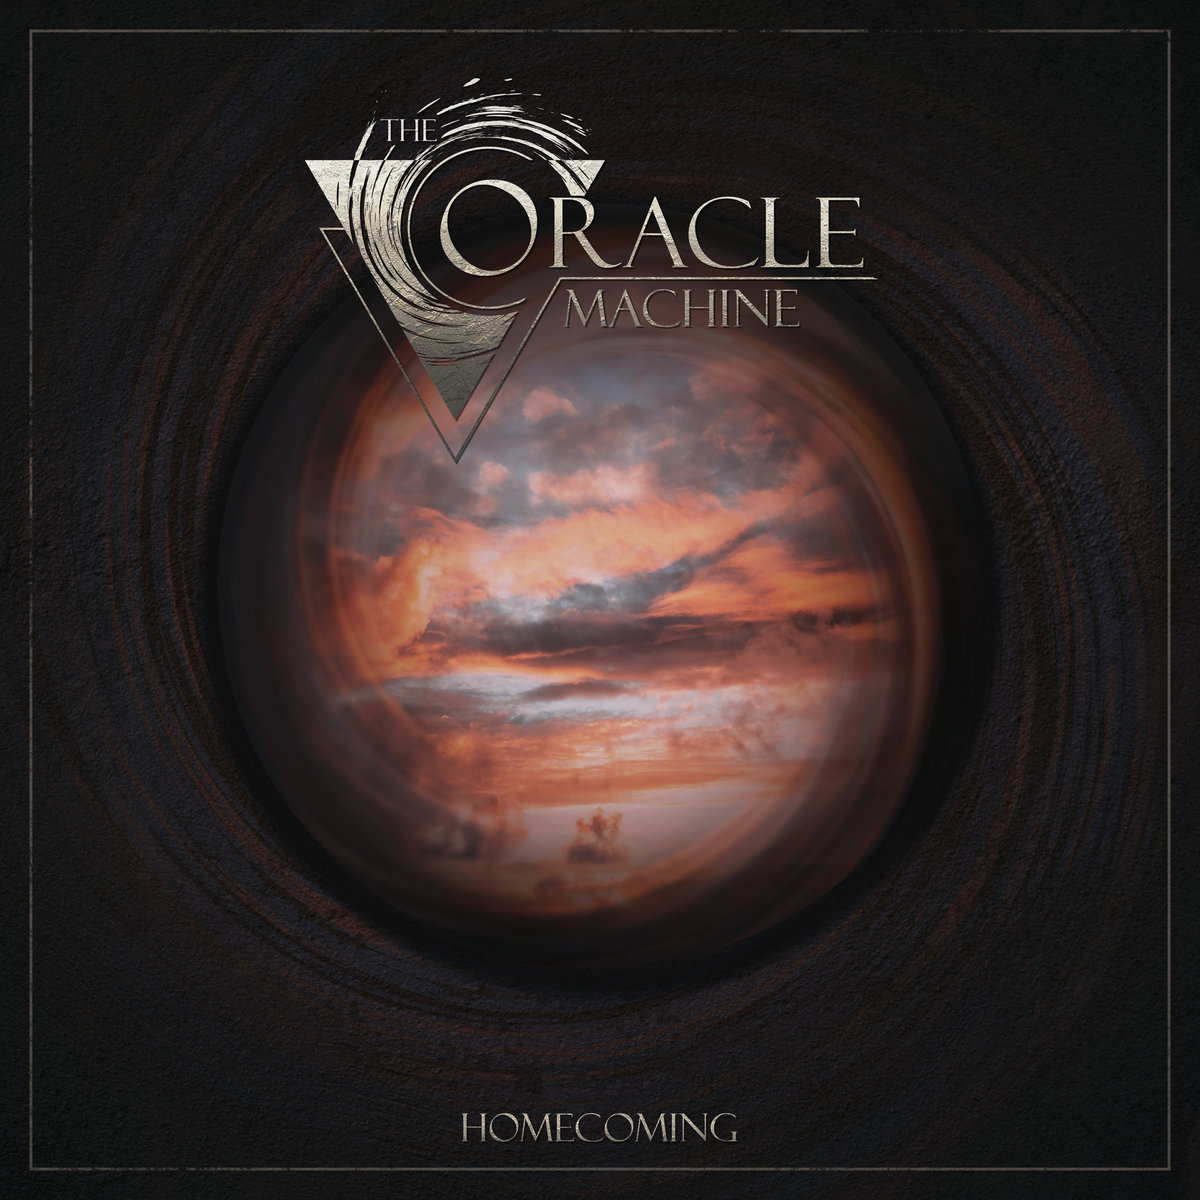 The Oracle Machine - "Homecoming" - 2023